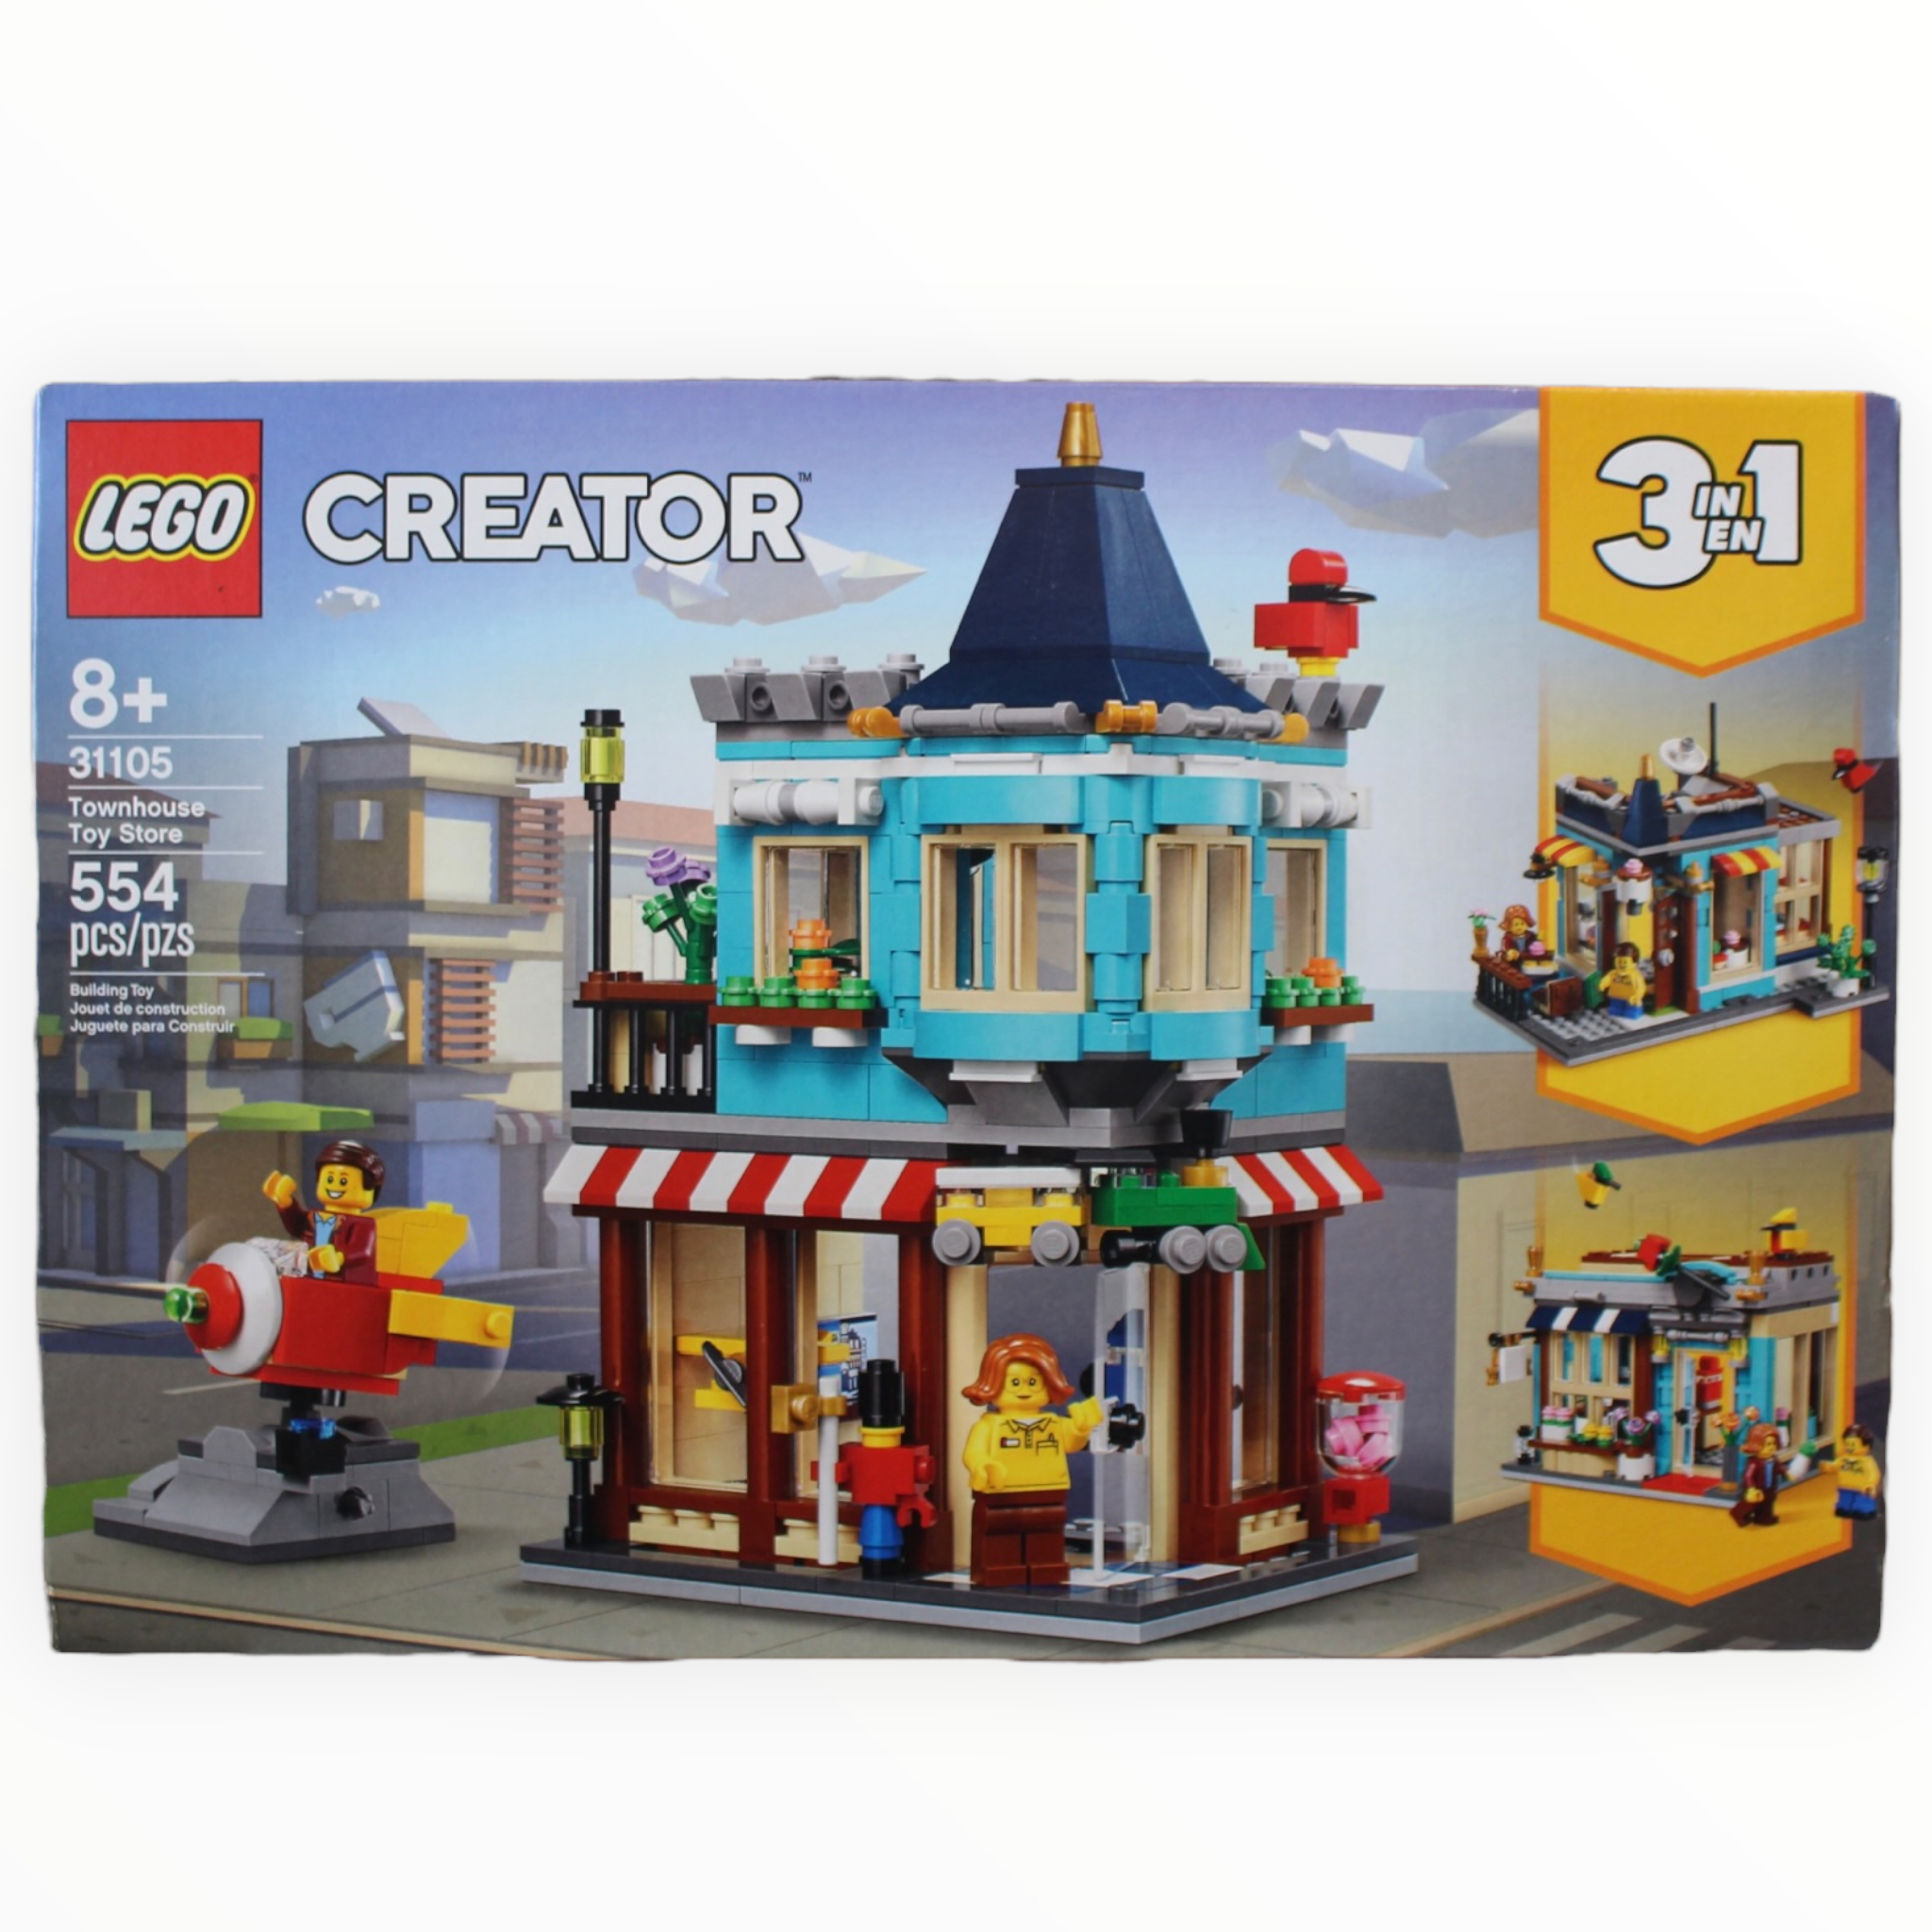 Retired Set 31105 Creator Townhouse Toy Store